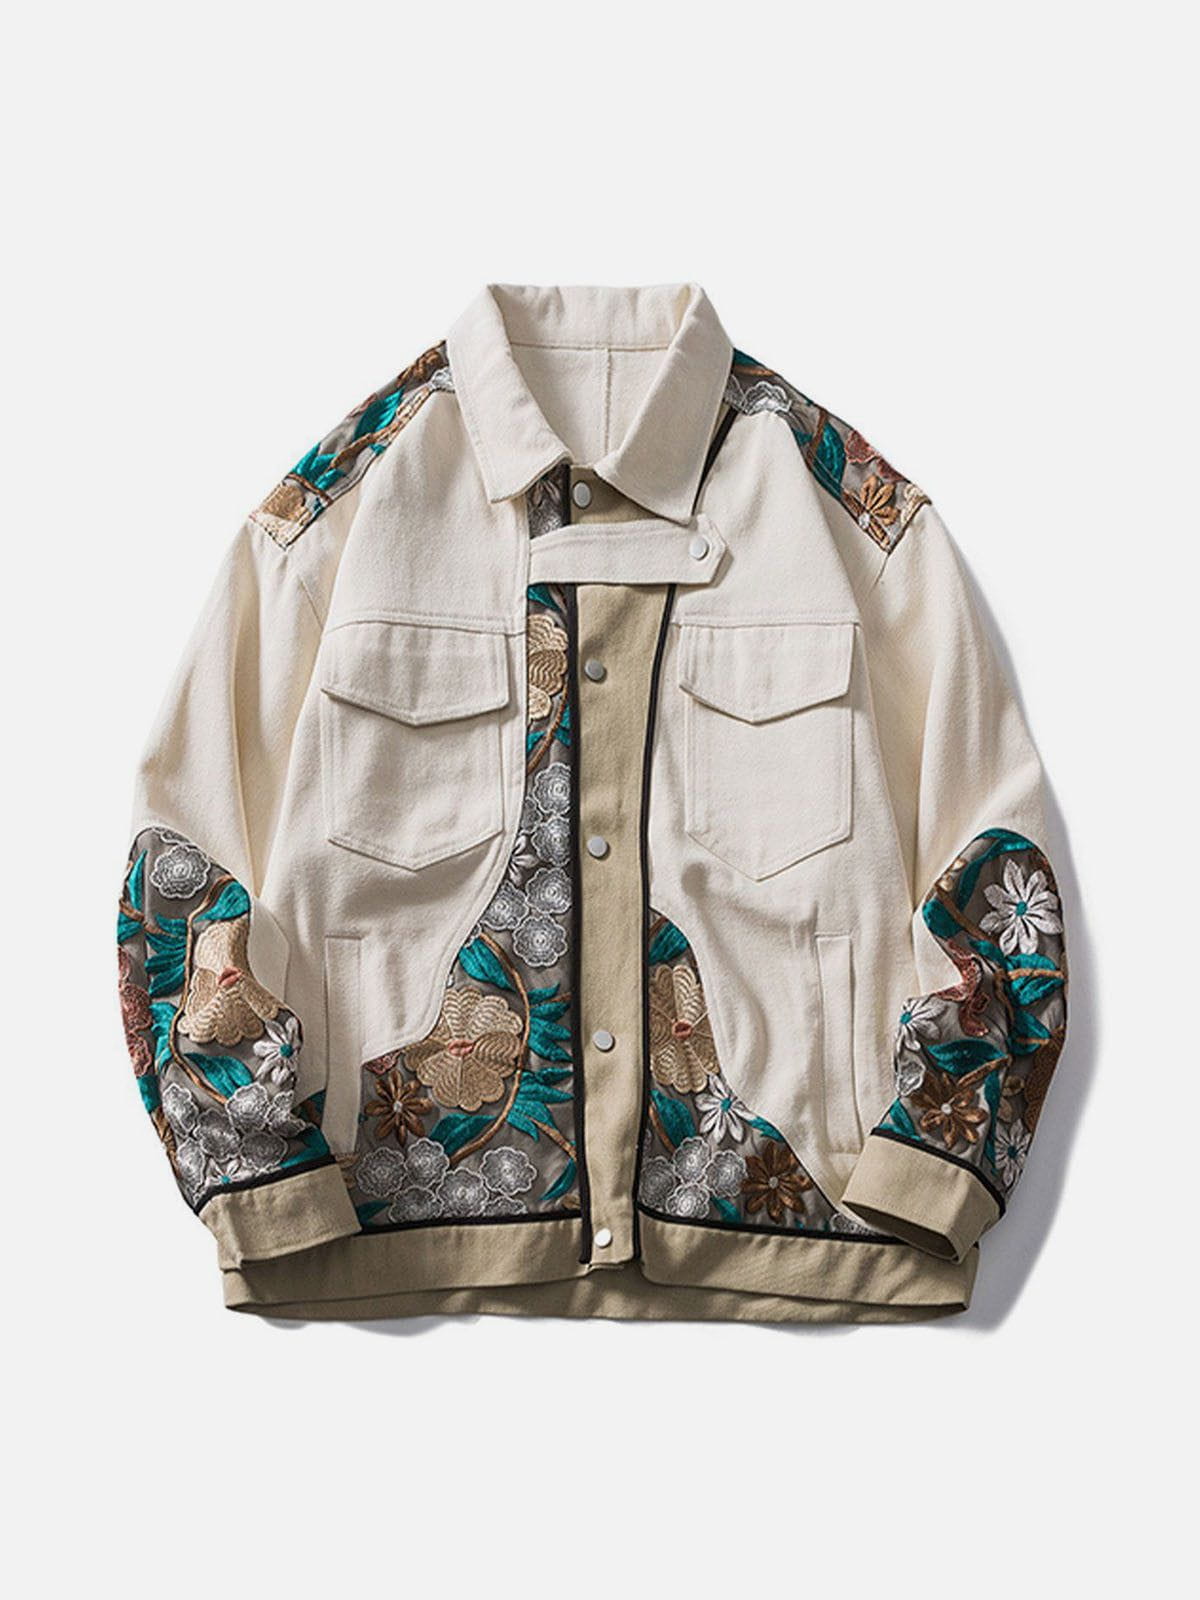 Vintage Flower Embroidery Stitching Jacket Streetwear Brand Techwear Combat Tactical YUGEN THEORY